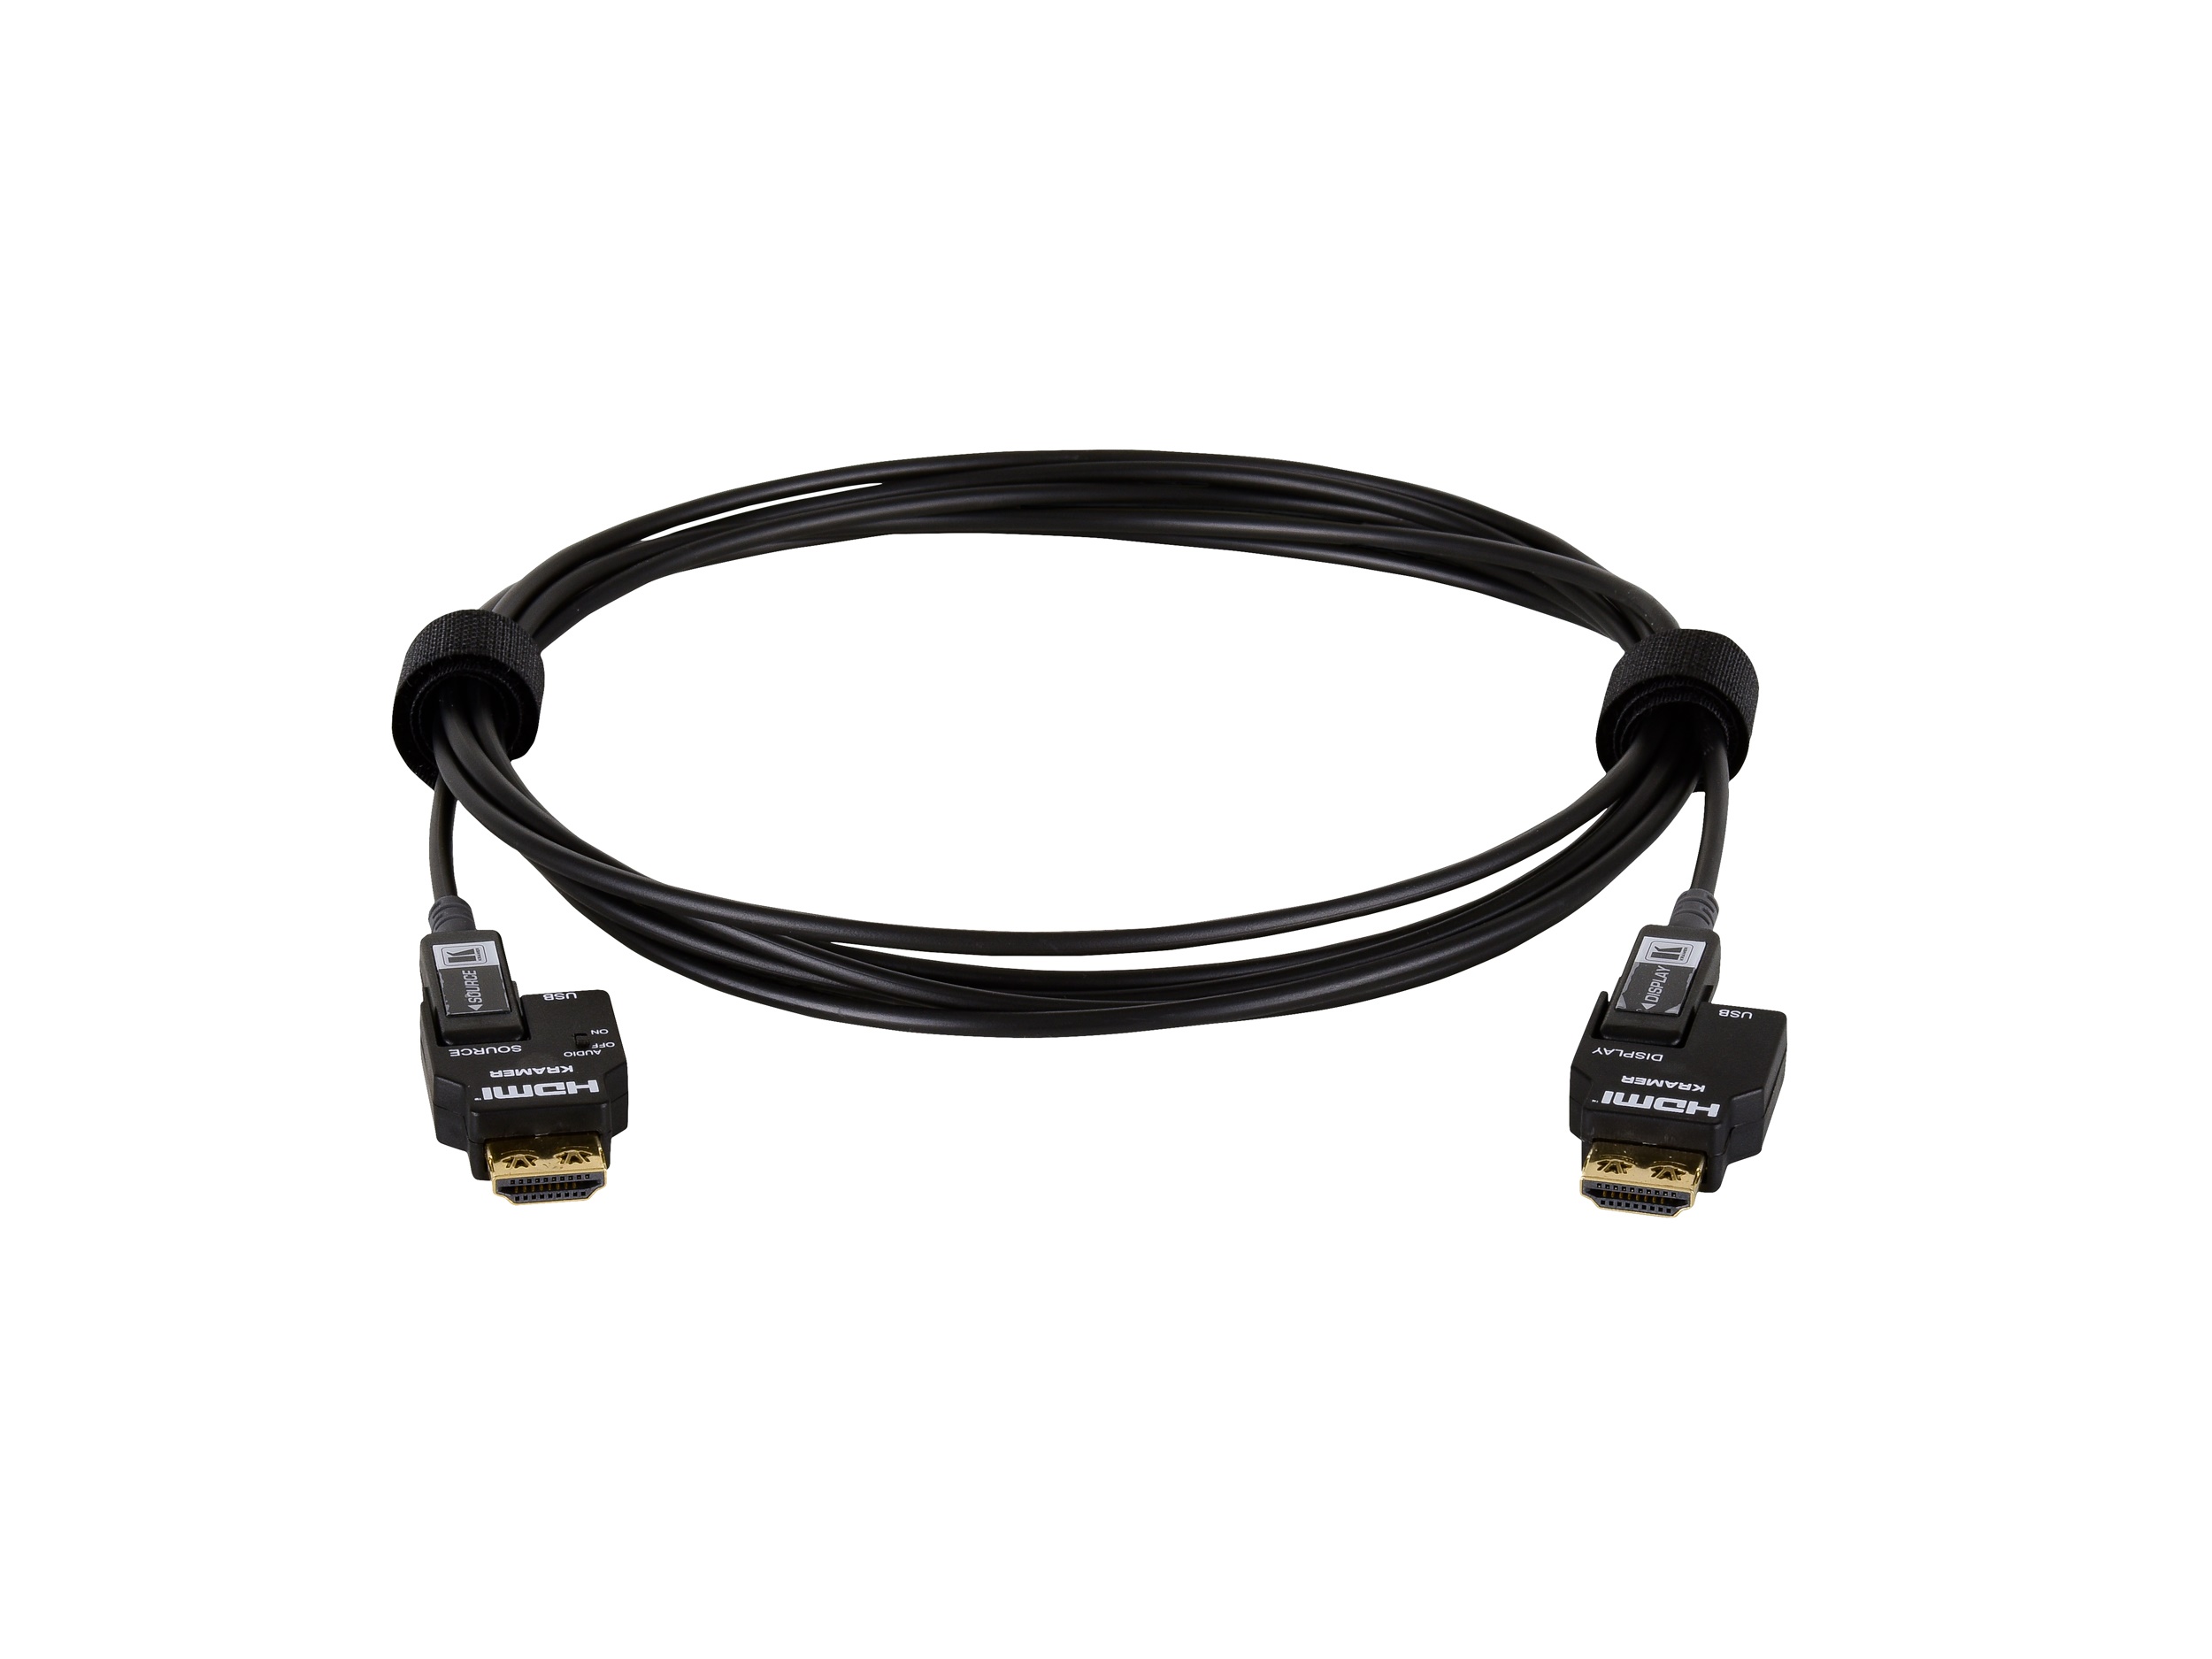 CRS-FIBERH-S1-33 10m/33ft 4K/60Hz (4x2x0) Secured Unidirectional 4K Pluggable HDMI Cable over Pure Fiber Cable by Kramer